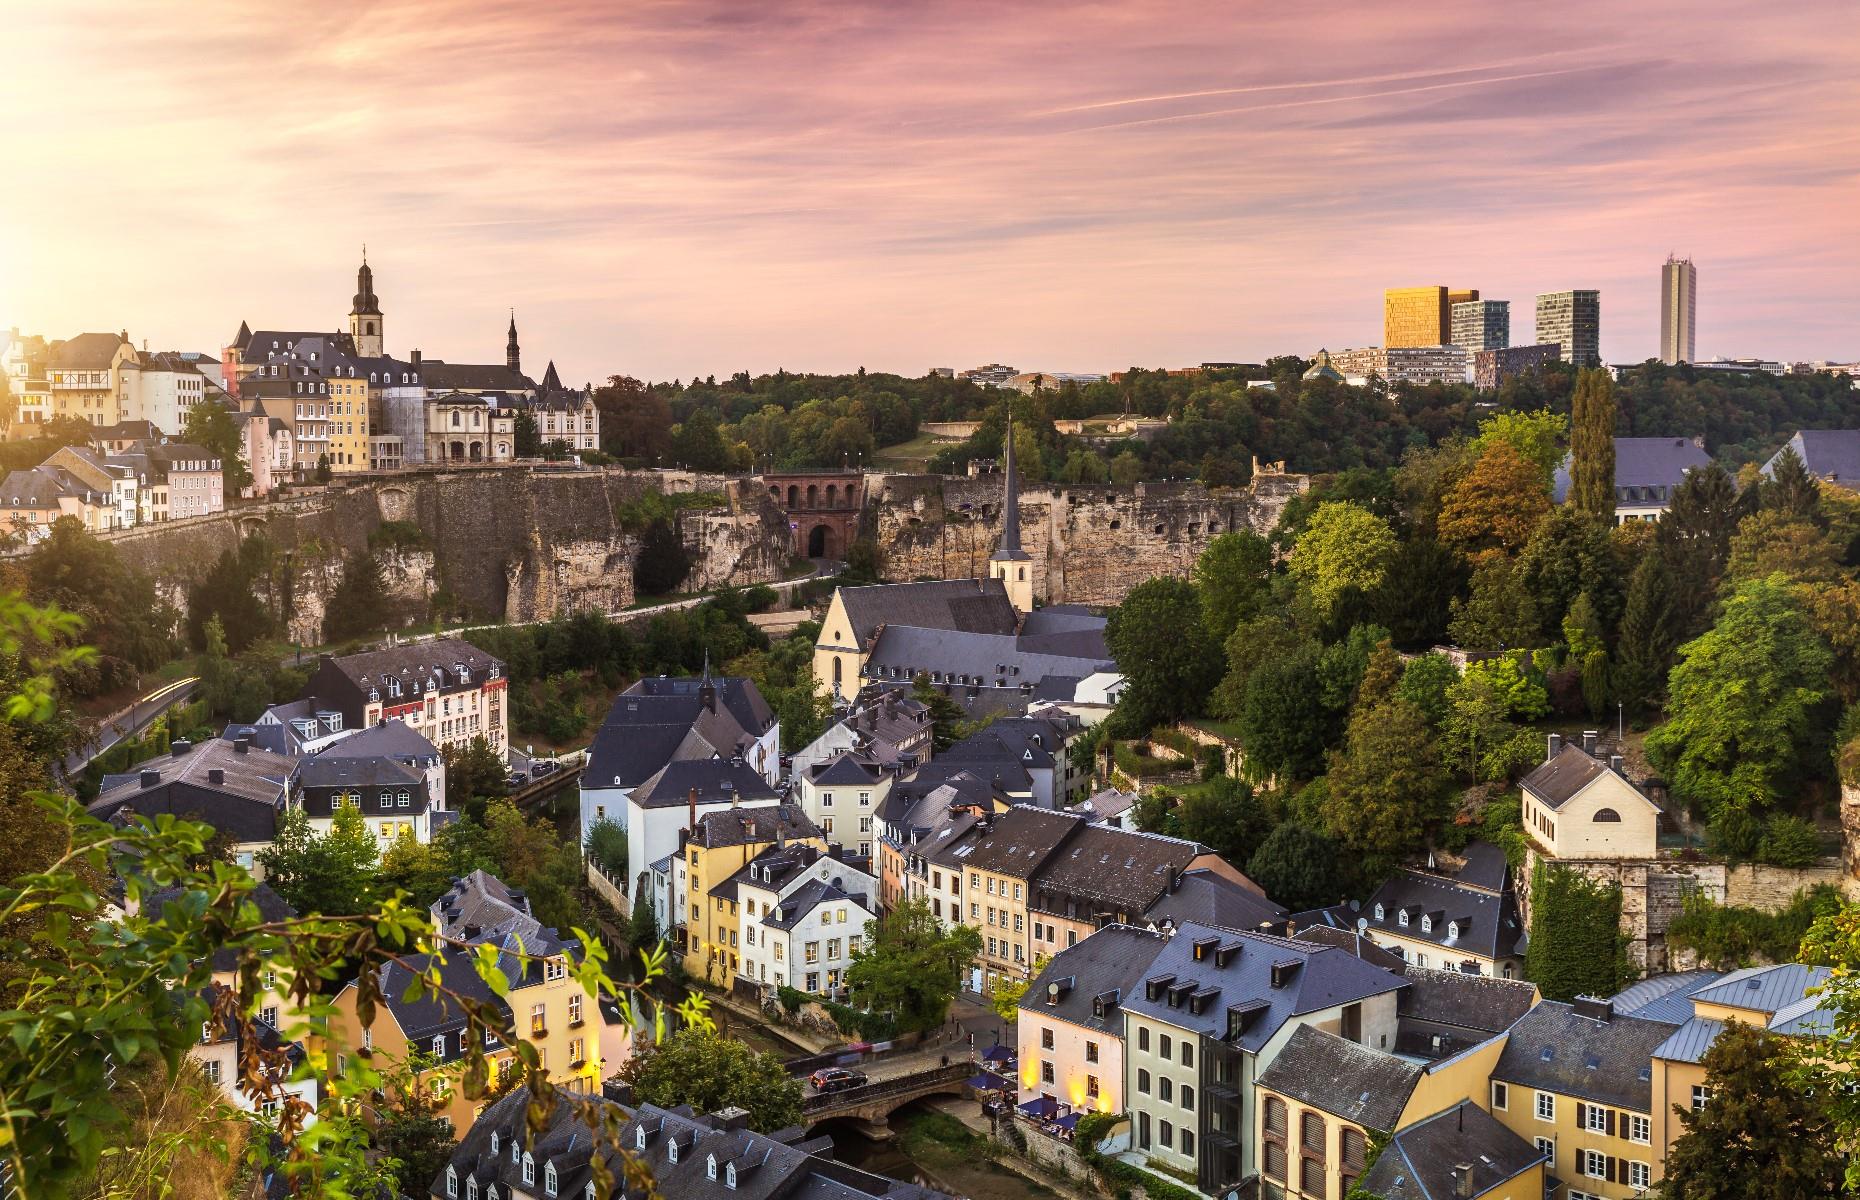 23rd most expensive country: Luxembourg (65.3)